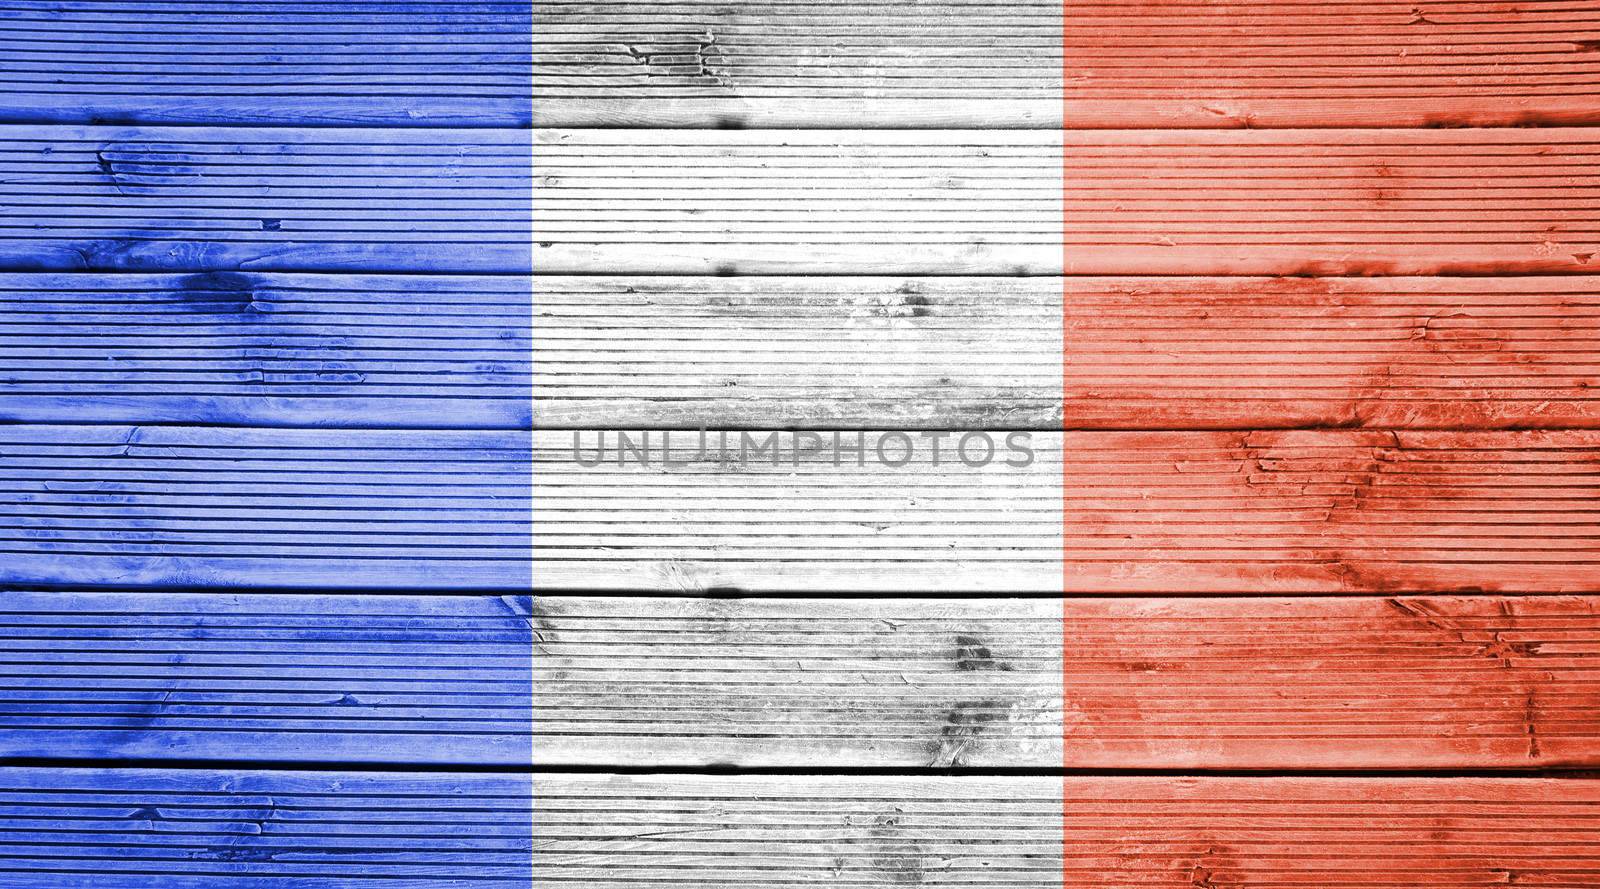 Natural wood planks texture background with the colors of the flag of France